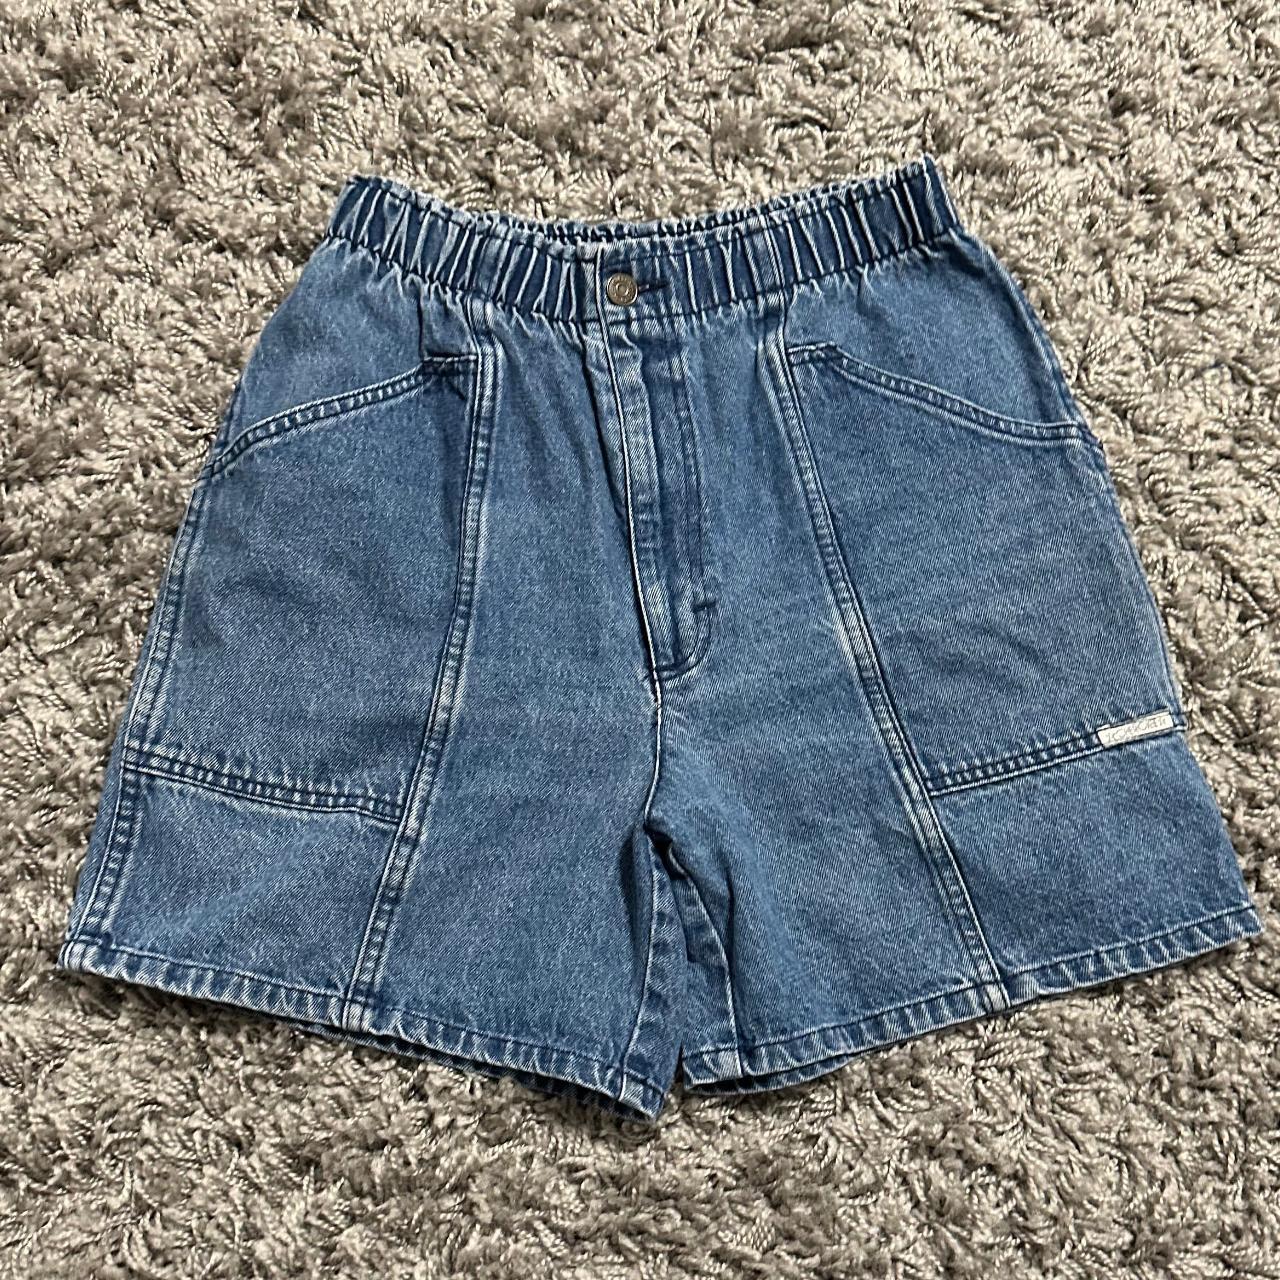 item listed by ezvintagefinds